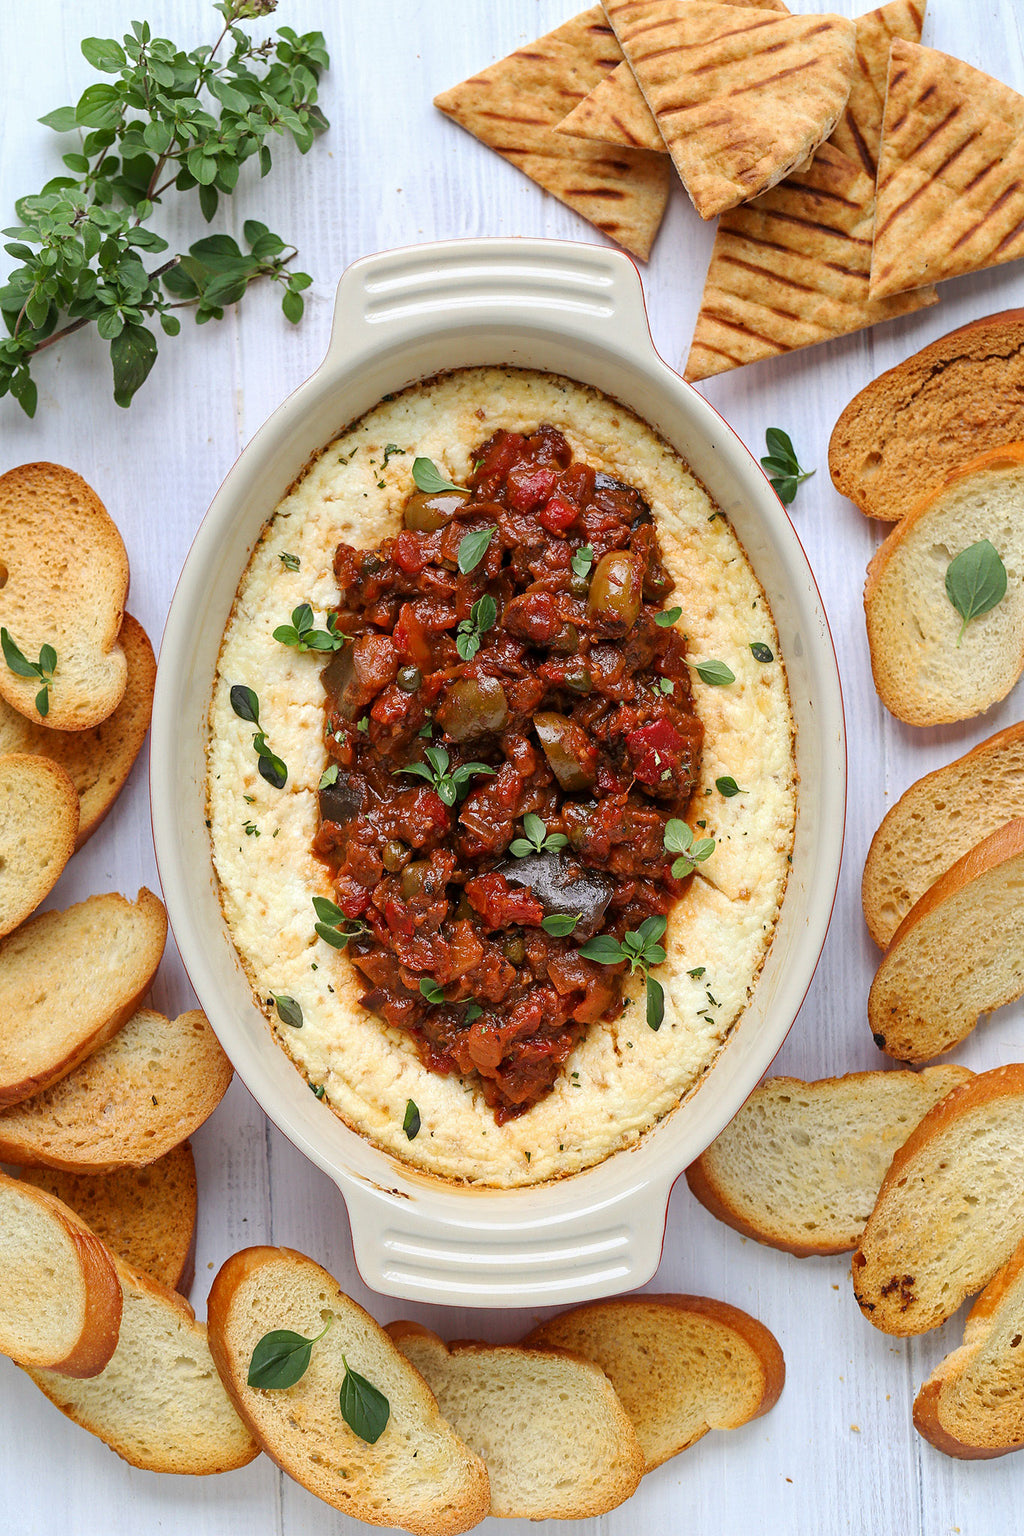 Baked Goats Cheese Dip with Bruschetta Caponata Relish